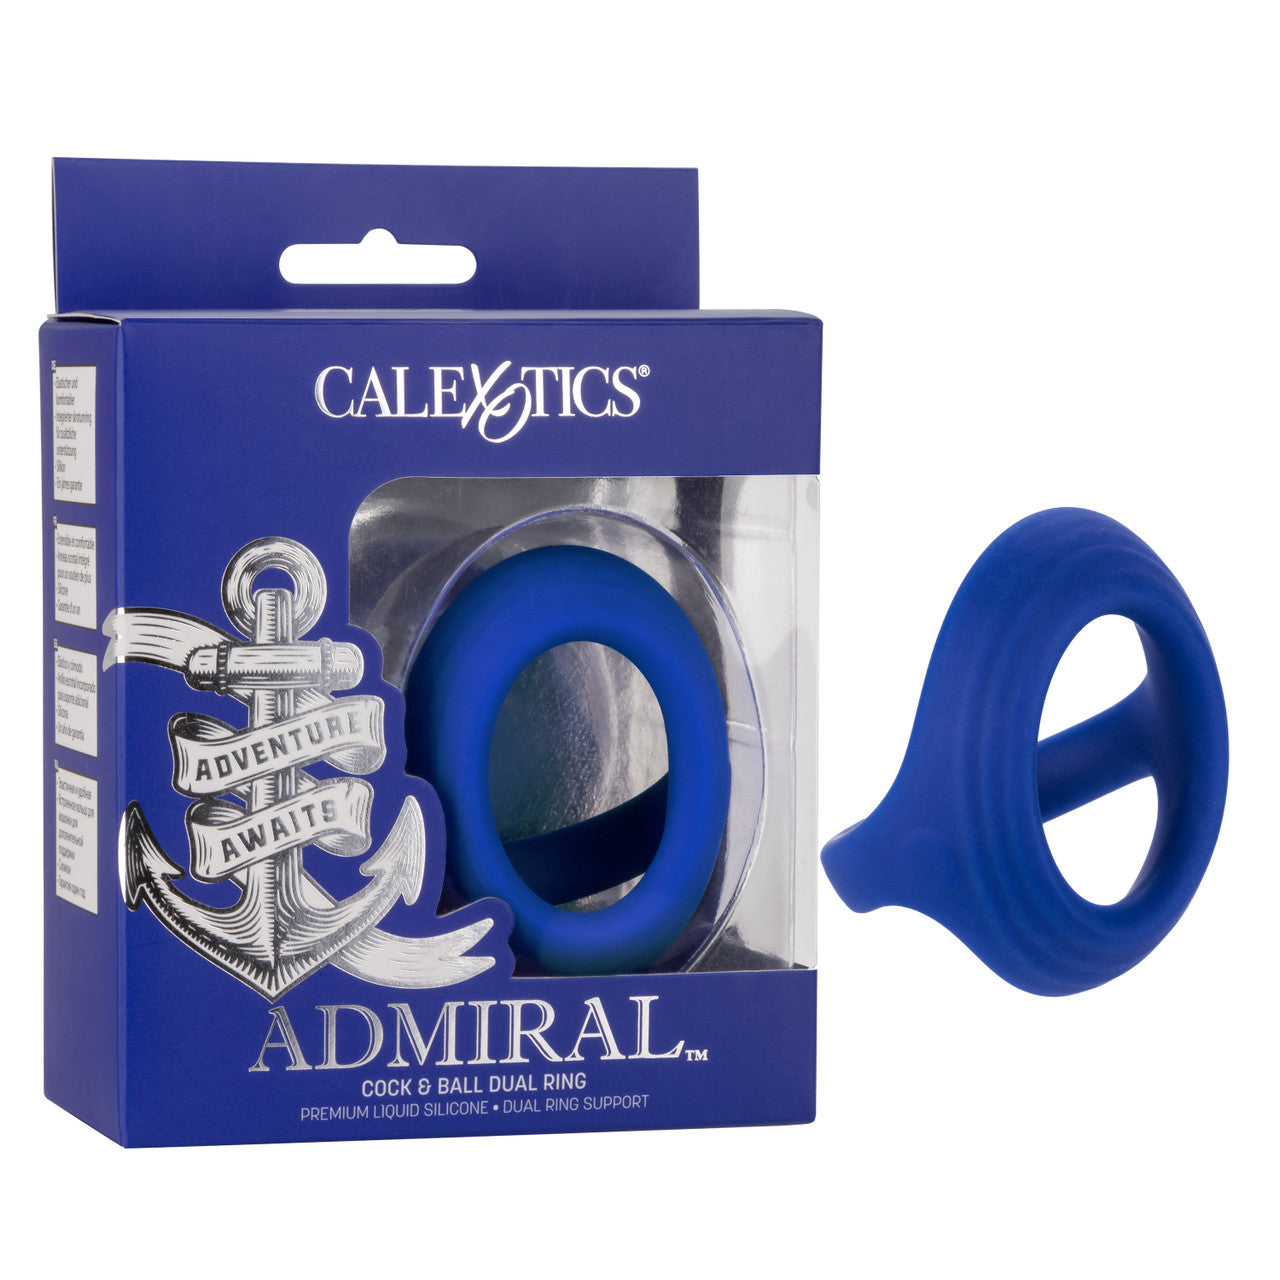 ADMIRAL COCK AND BALL DUAL RING